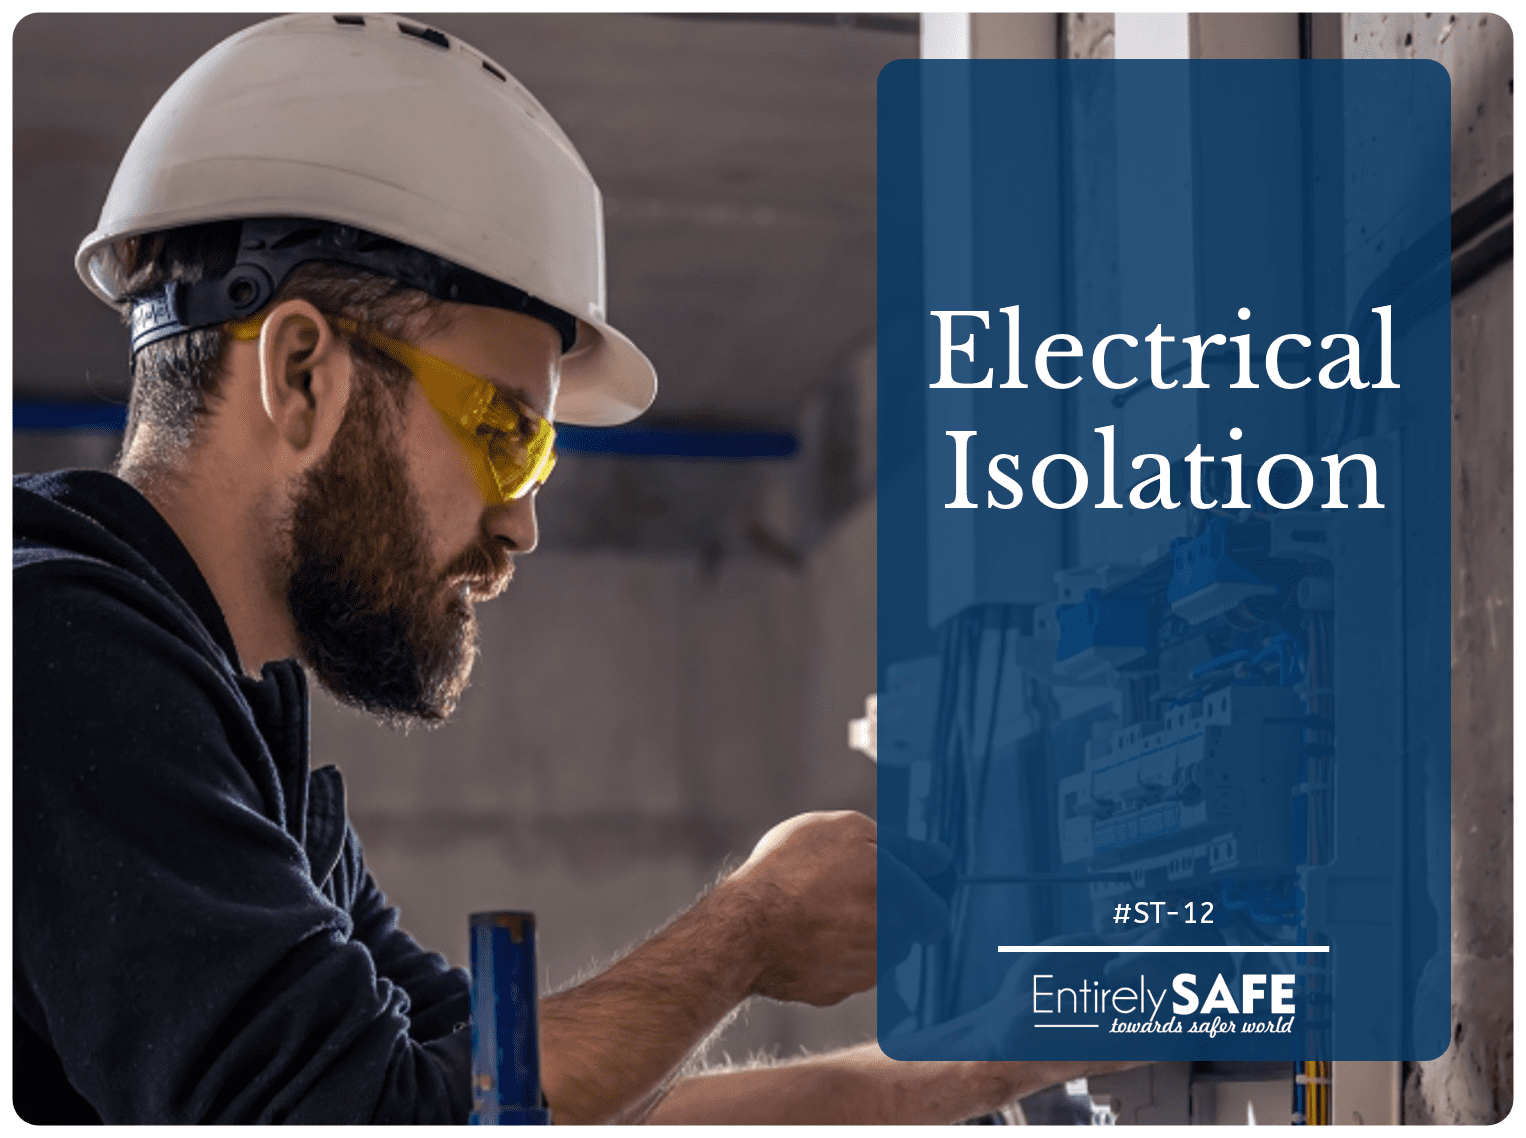 ST-12-Electrical-Isolation-FREE-Download-Power-Point (1)